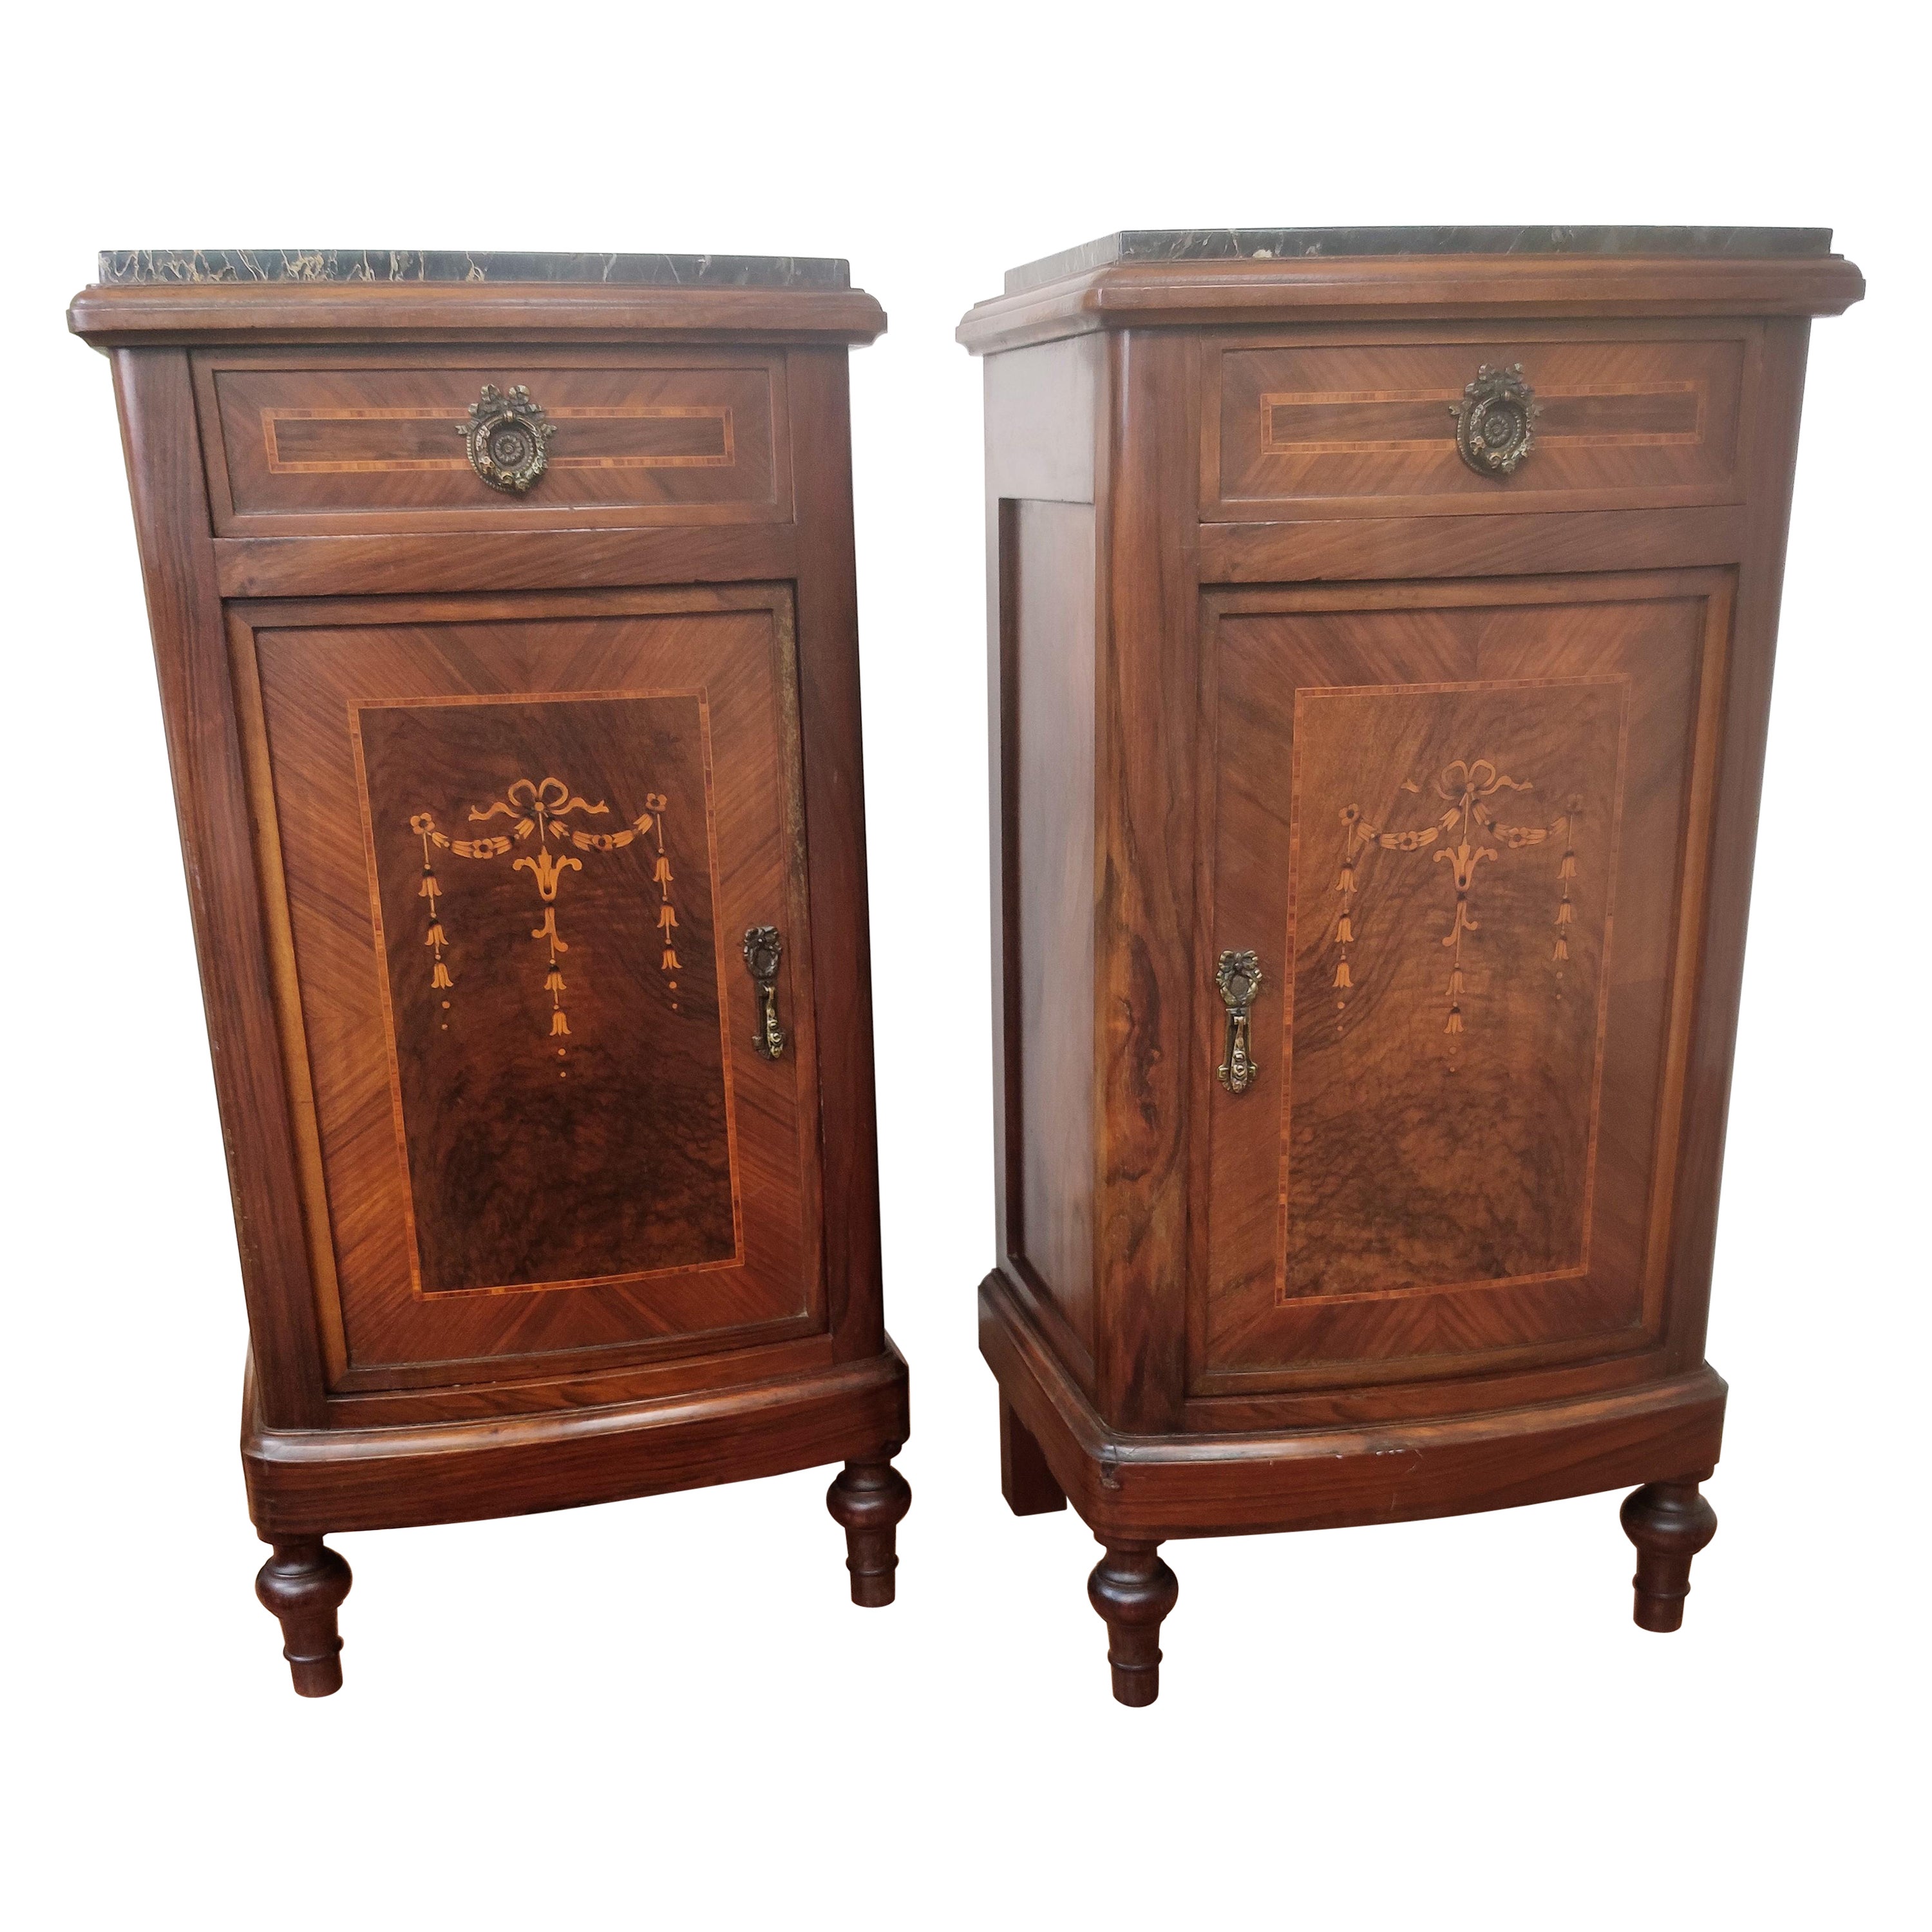 Pair of Italian Antique Marquetry Walnut Portoro Marble Night Stands Bed Tables